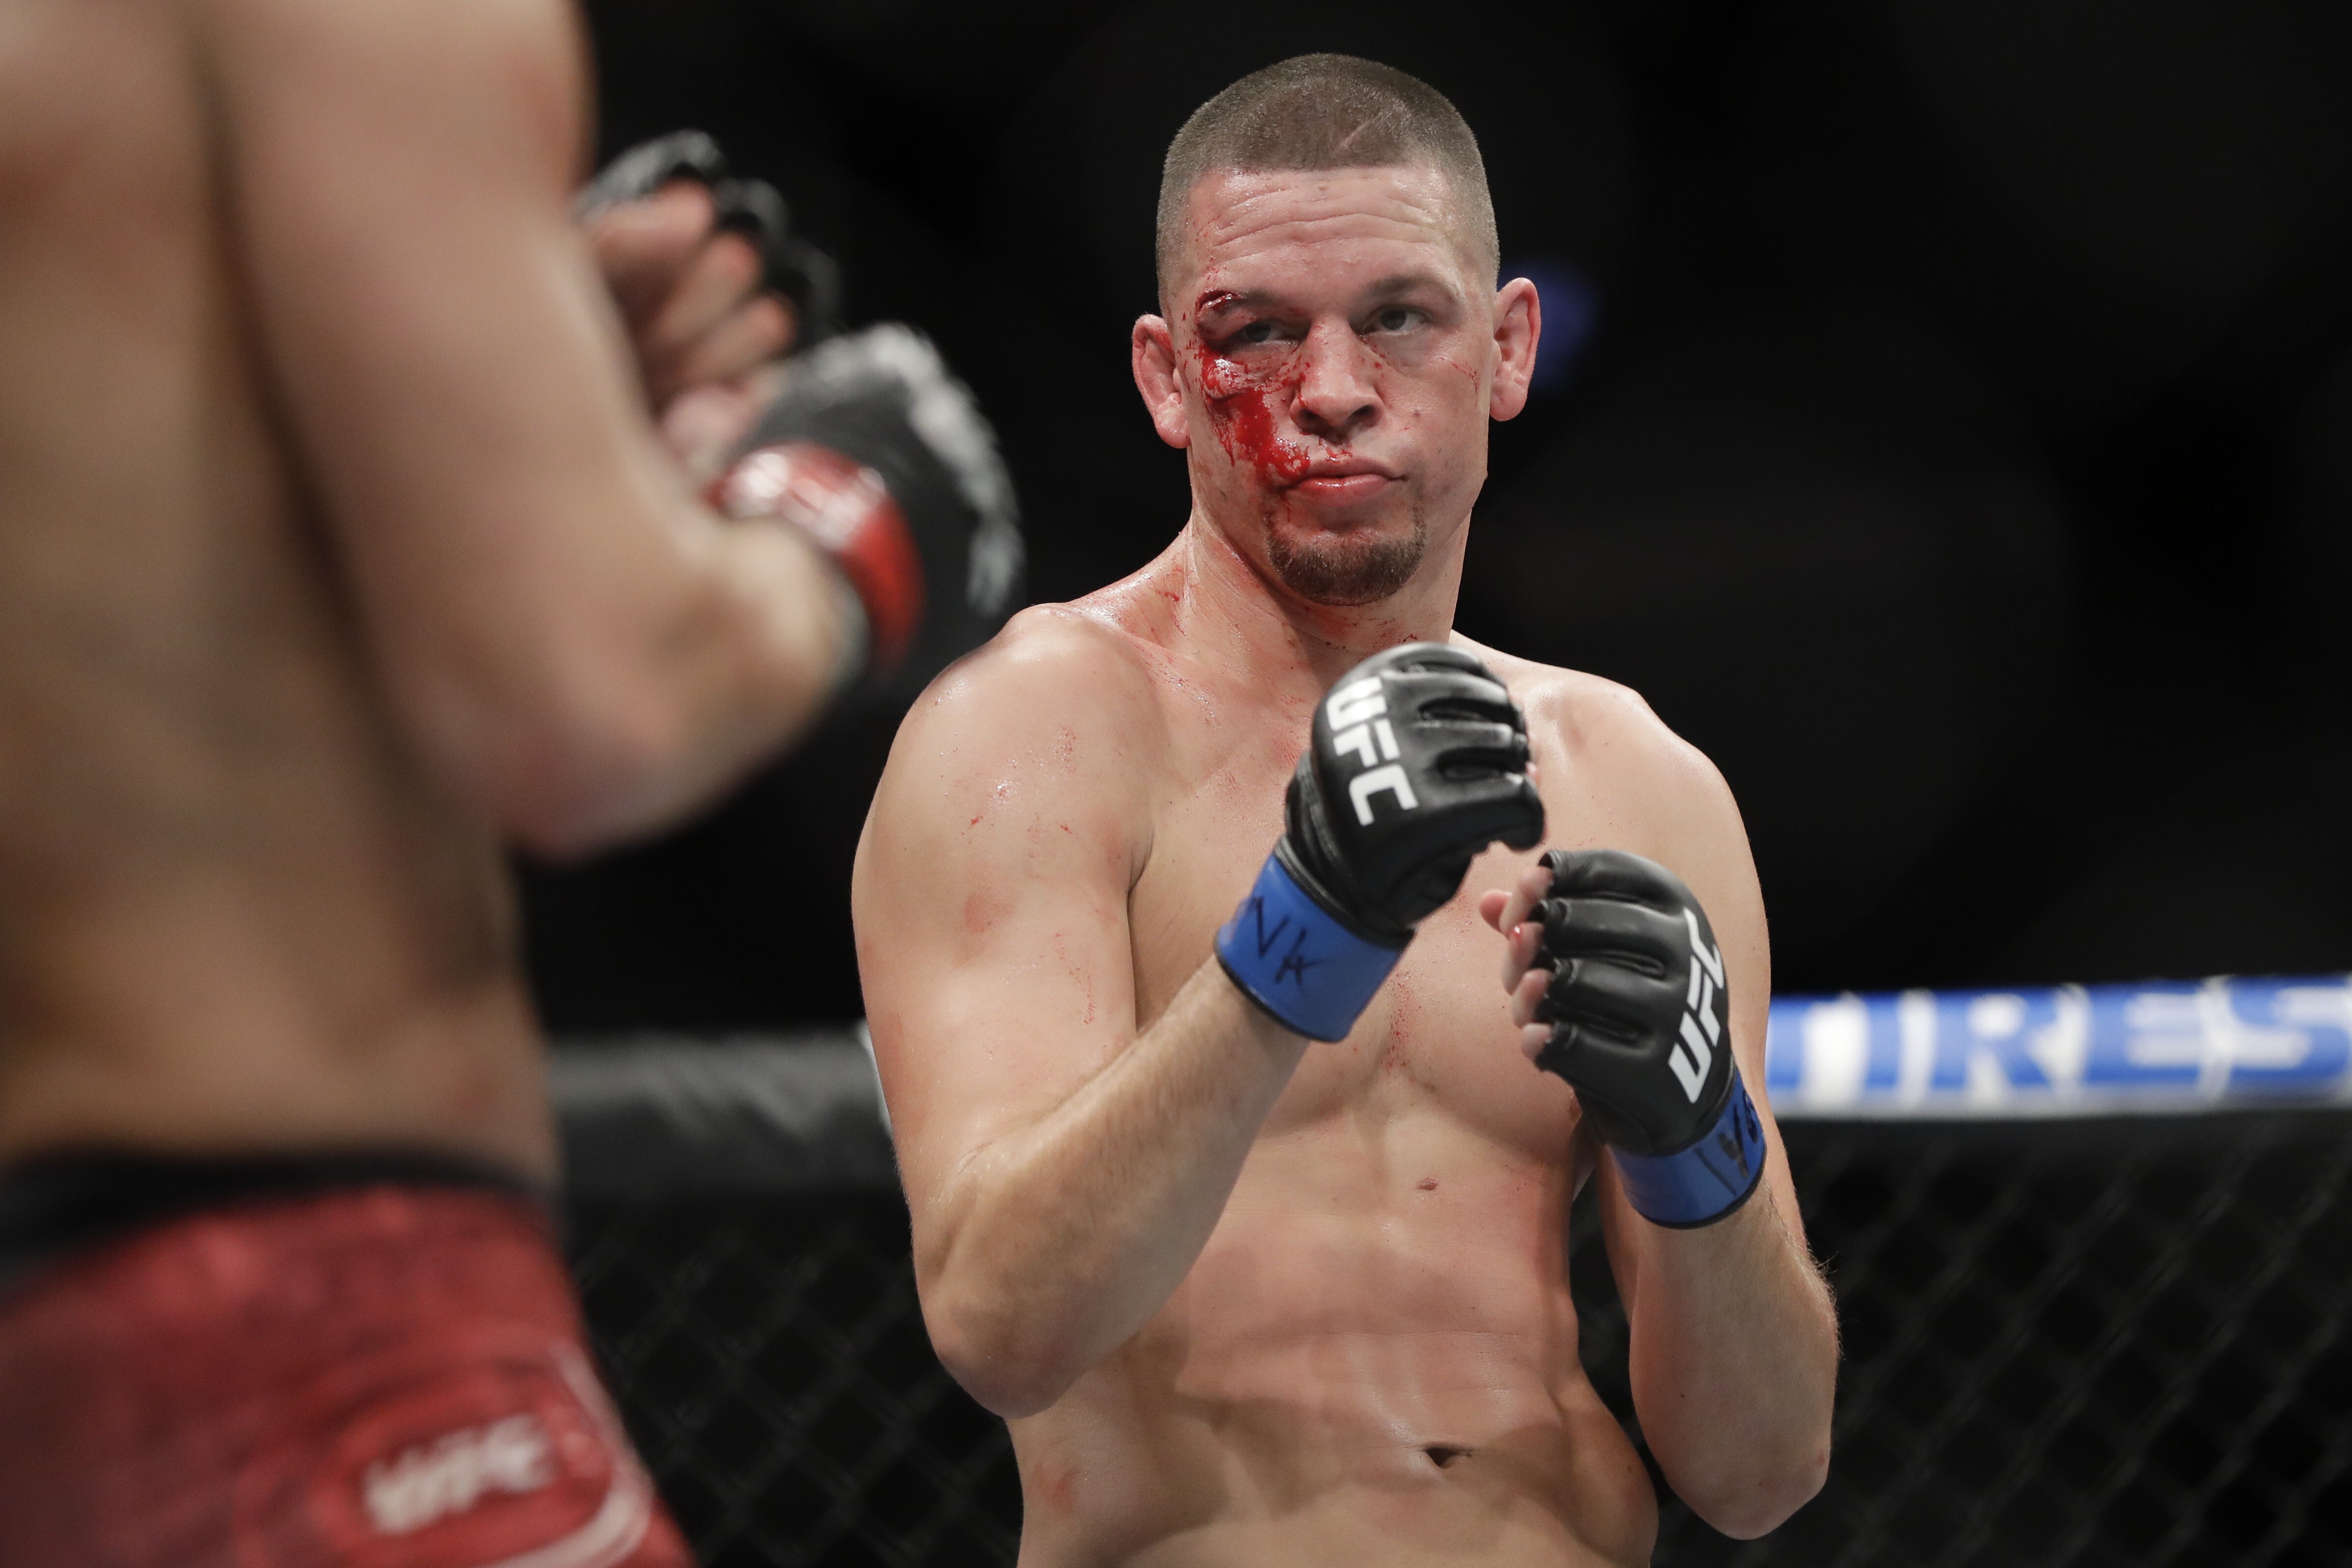 UFC welterweight Nate Diaz fights Jorge Masvidal for the ‘BMF’ belt at UFC 244 in New York. Photo: AP